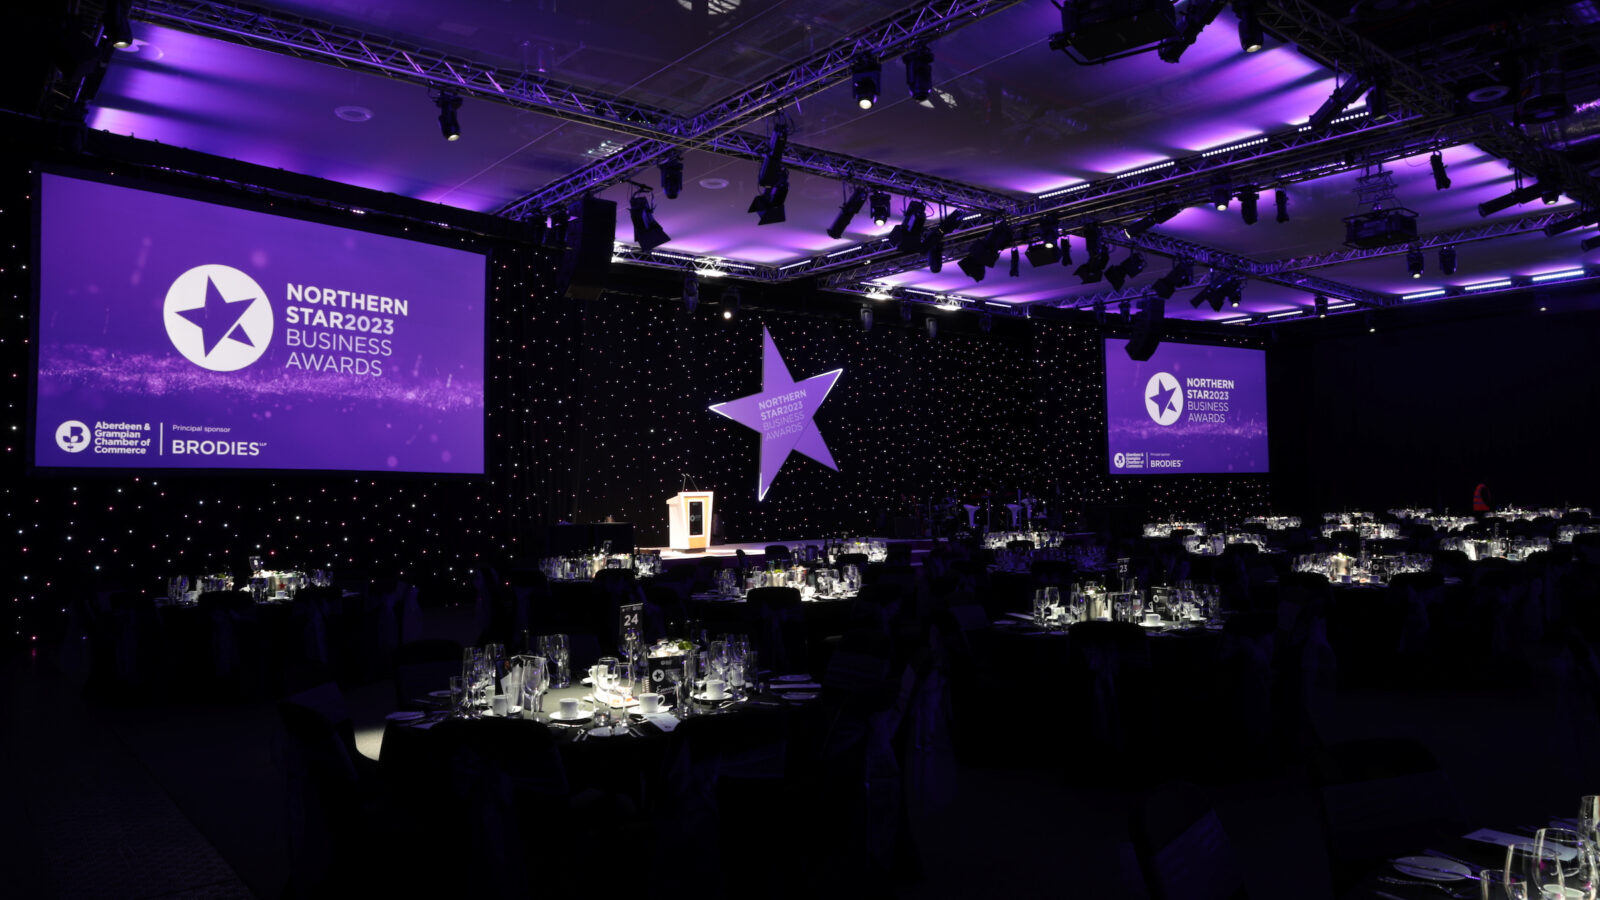 Northern Star Business Awards to boost Aberdeen city centre